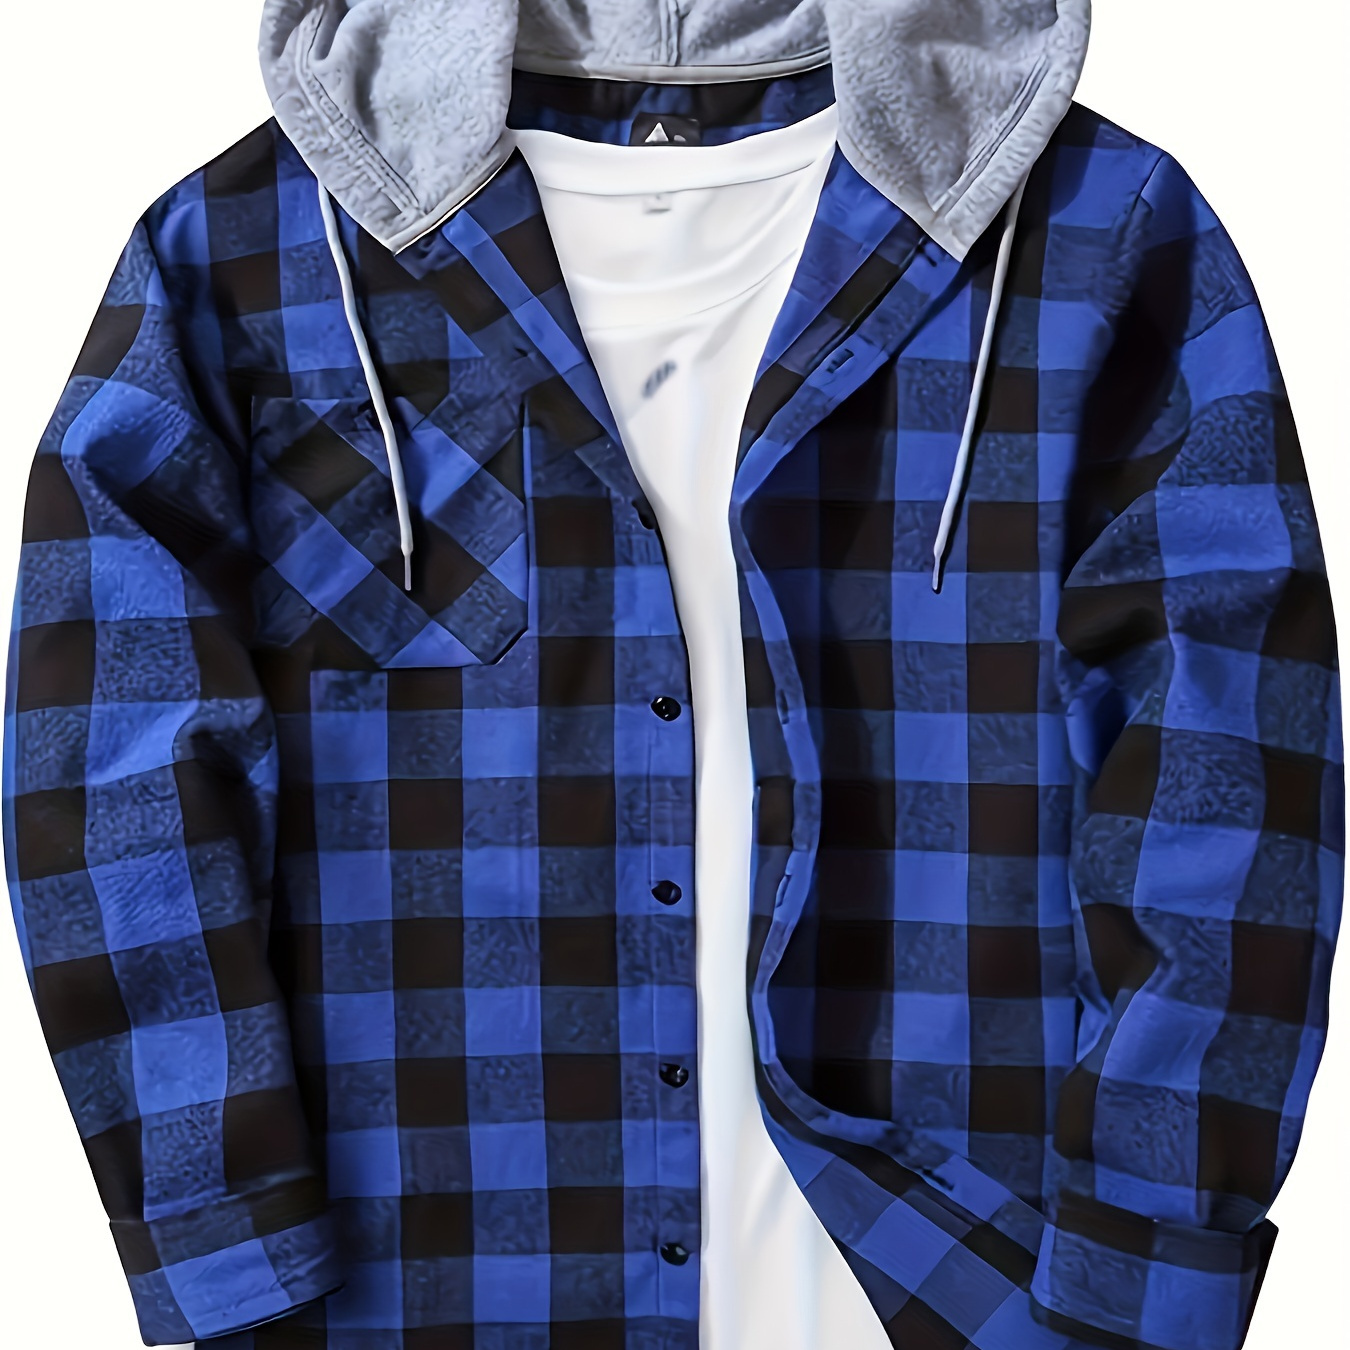 

Plaid Pattern Men's Long Sleeve Hooded Shirt Jacket With Chest Pocket, Men's Casual Fall Winter Outwear